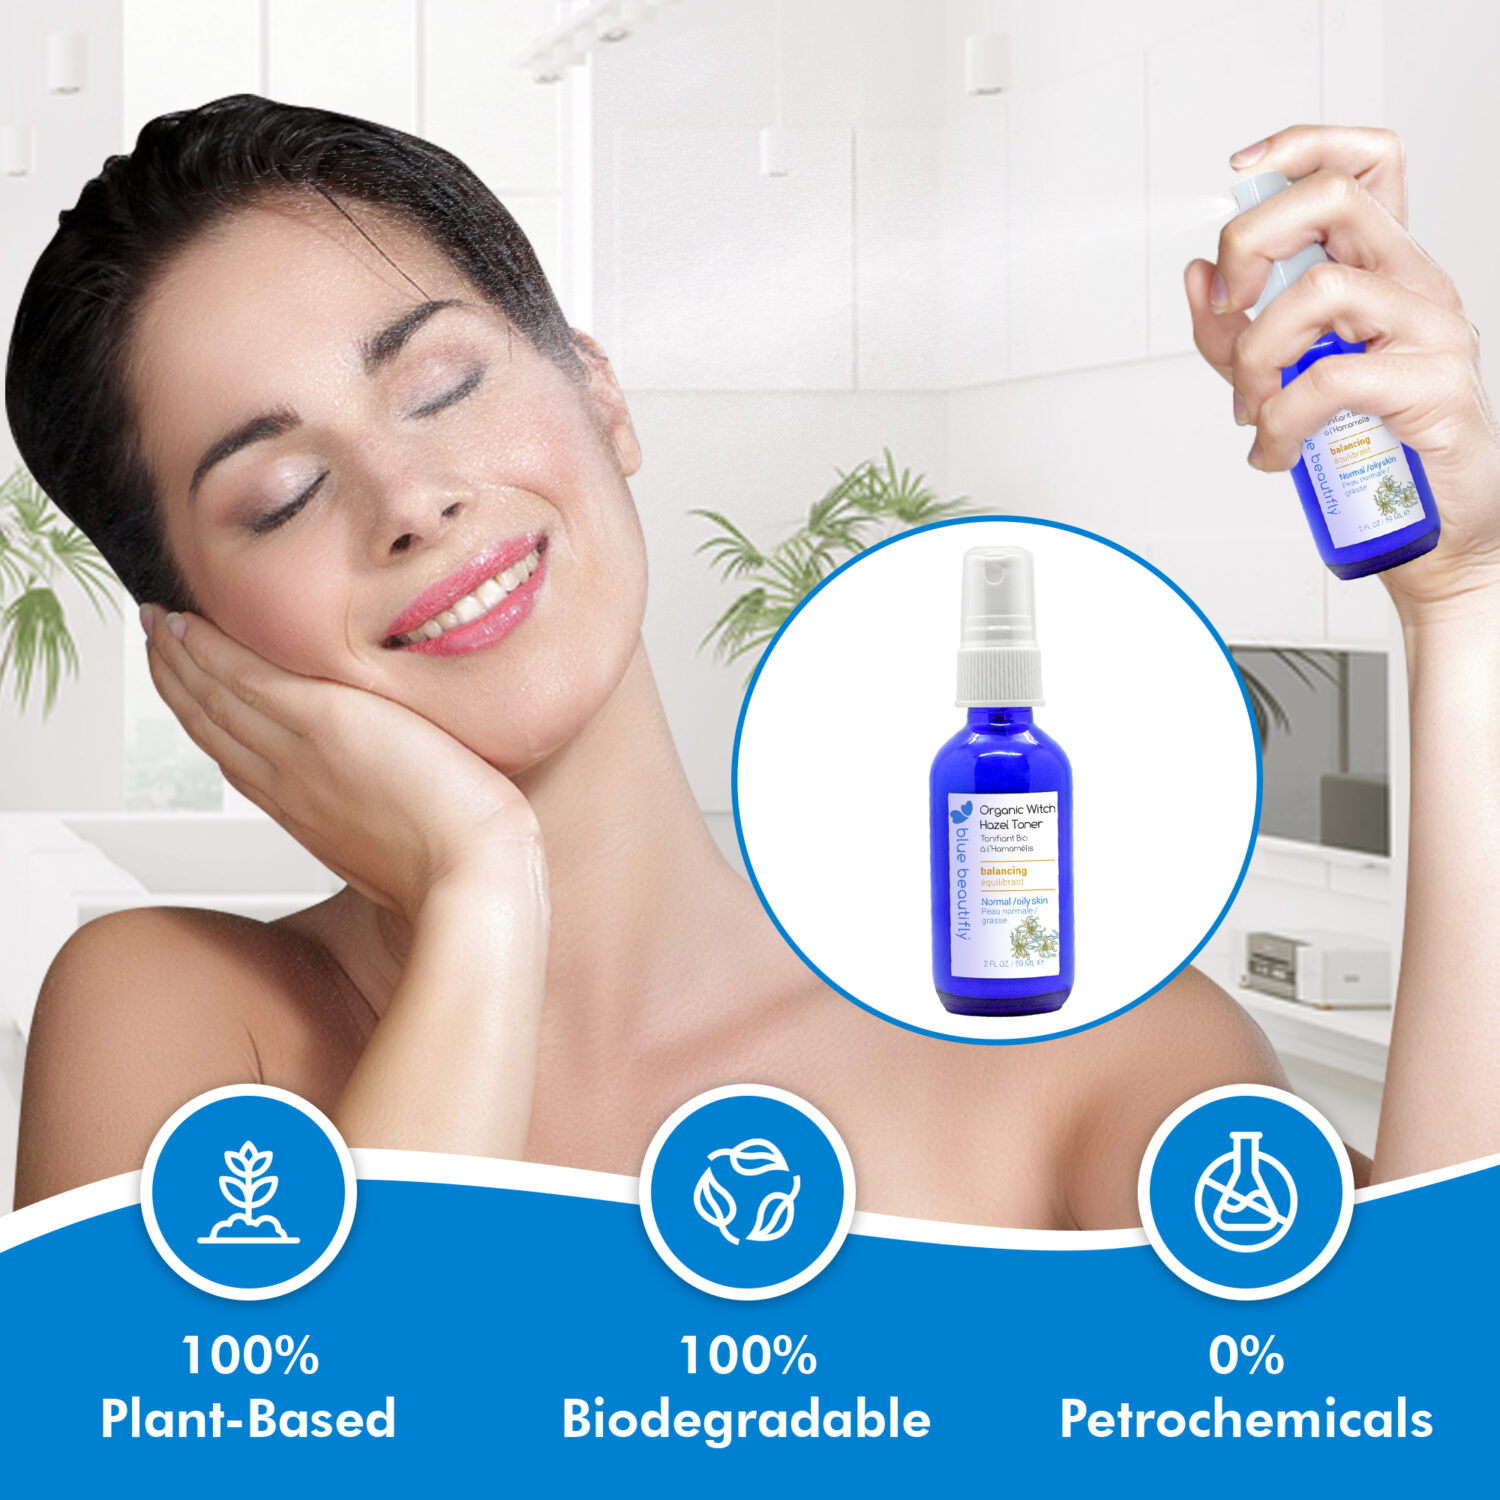 Blue Beautifly Organic Witch Hazel Toner s 100% plant-based and biodegradable and contains no petrochemicals or toxins